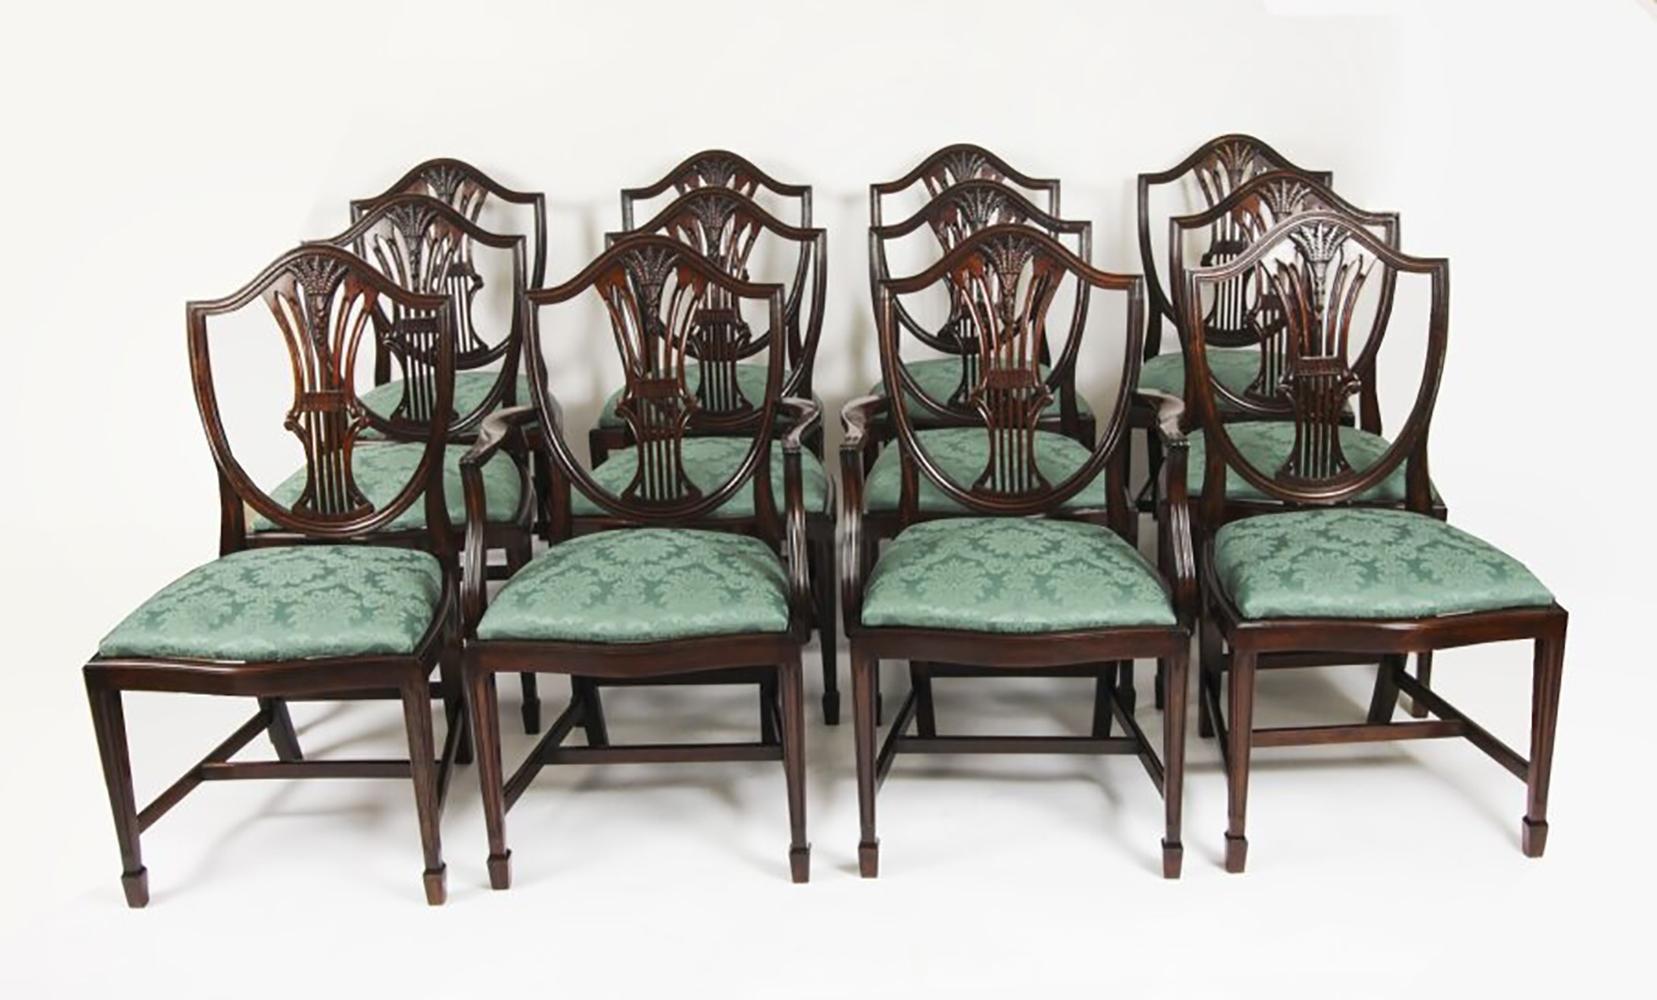 Antique 14ft Regency Revival Triple Pillar Dining Table & 14 Chairs 19th Century For Sale 8